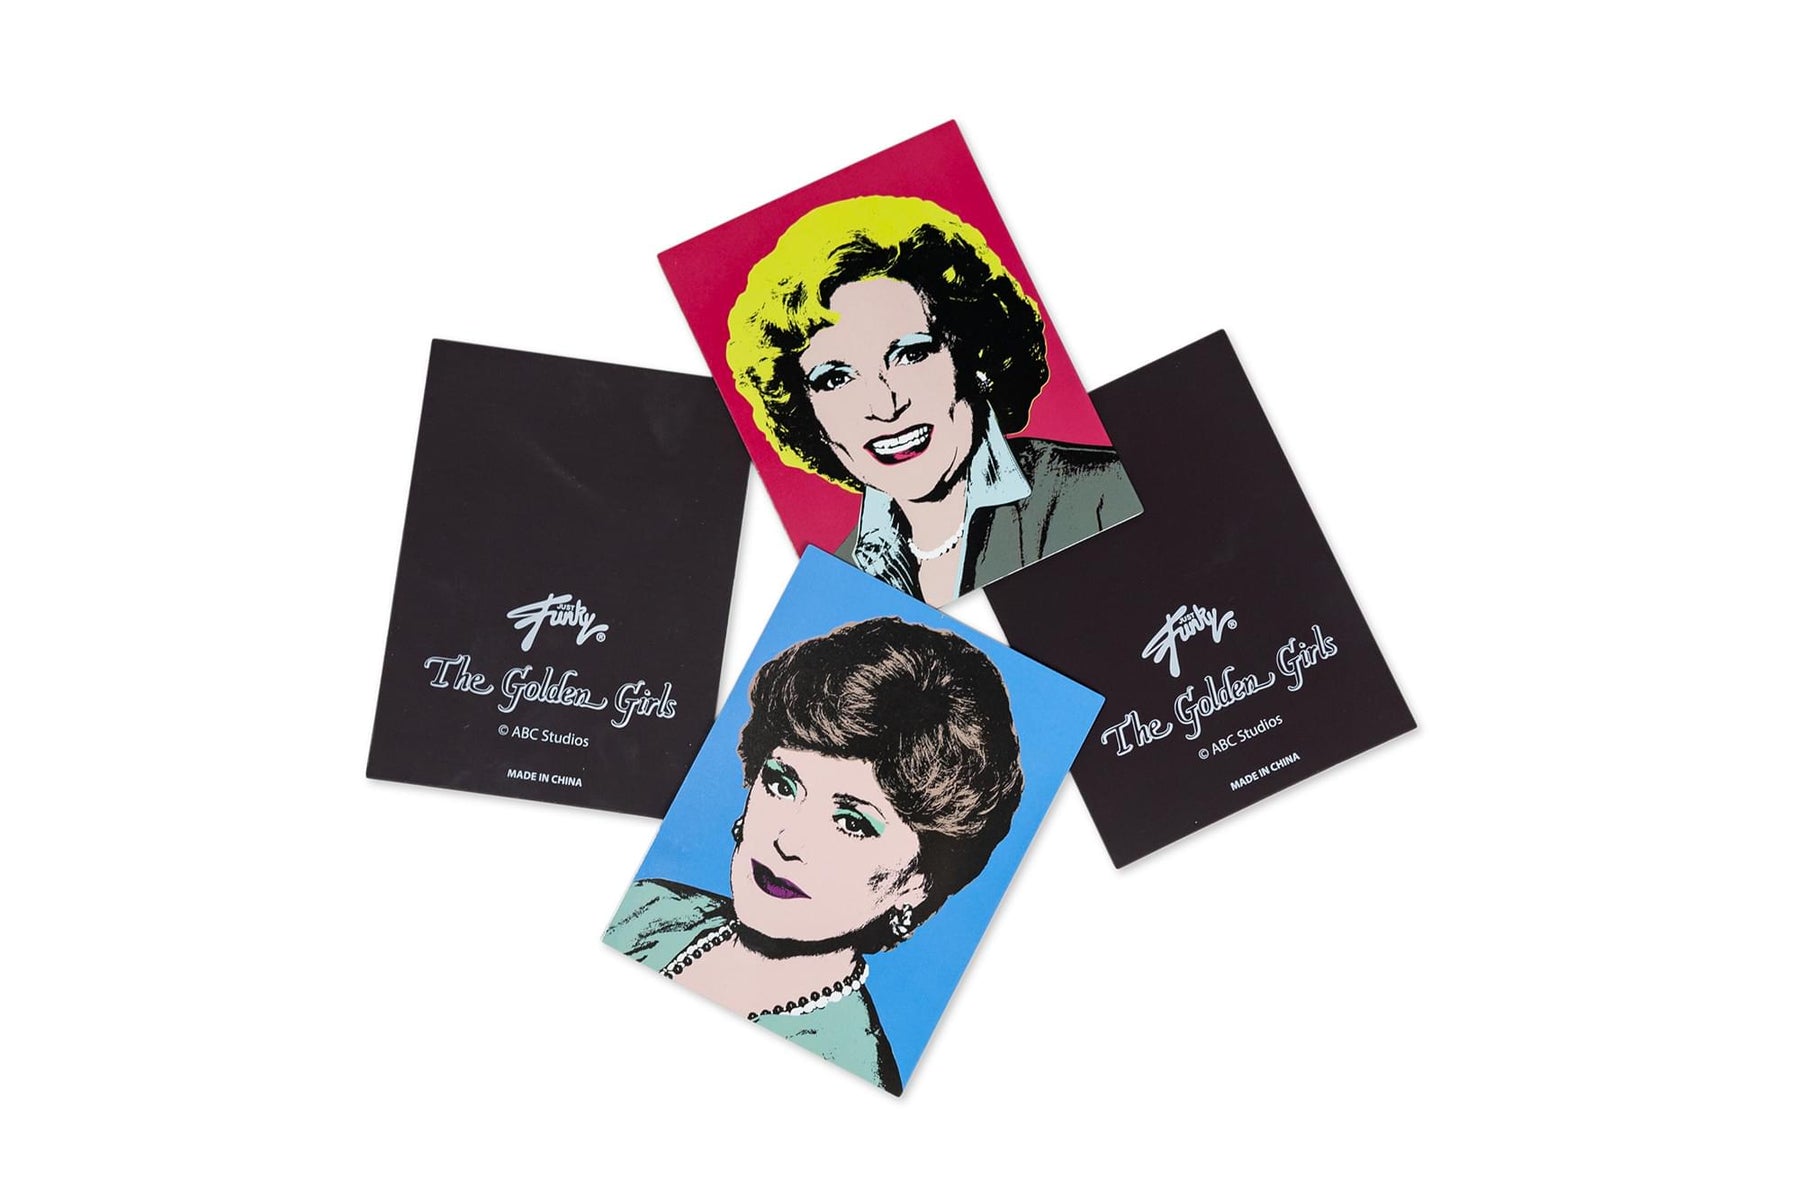 The Golden Girls Collectible Warhol Art Style 4-Magnet Set | 4-Inch Tall Magnets